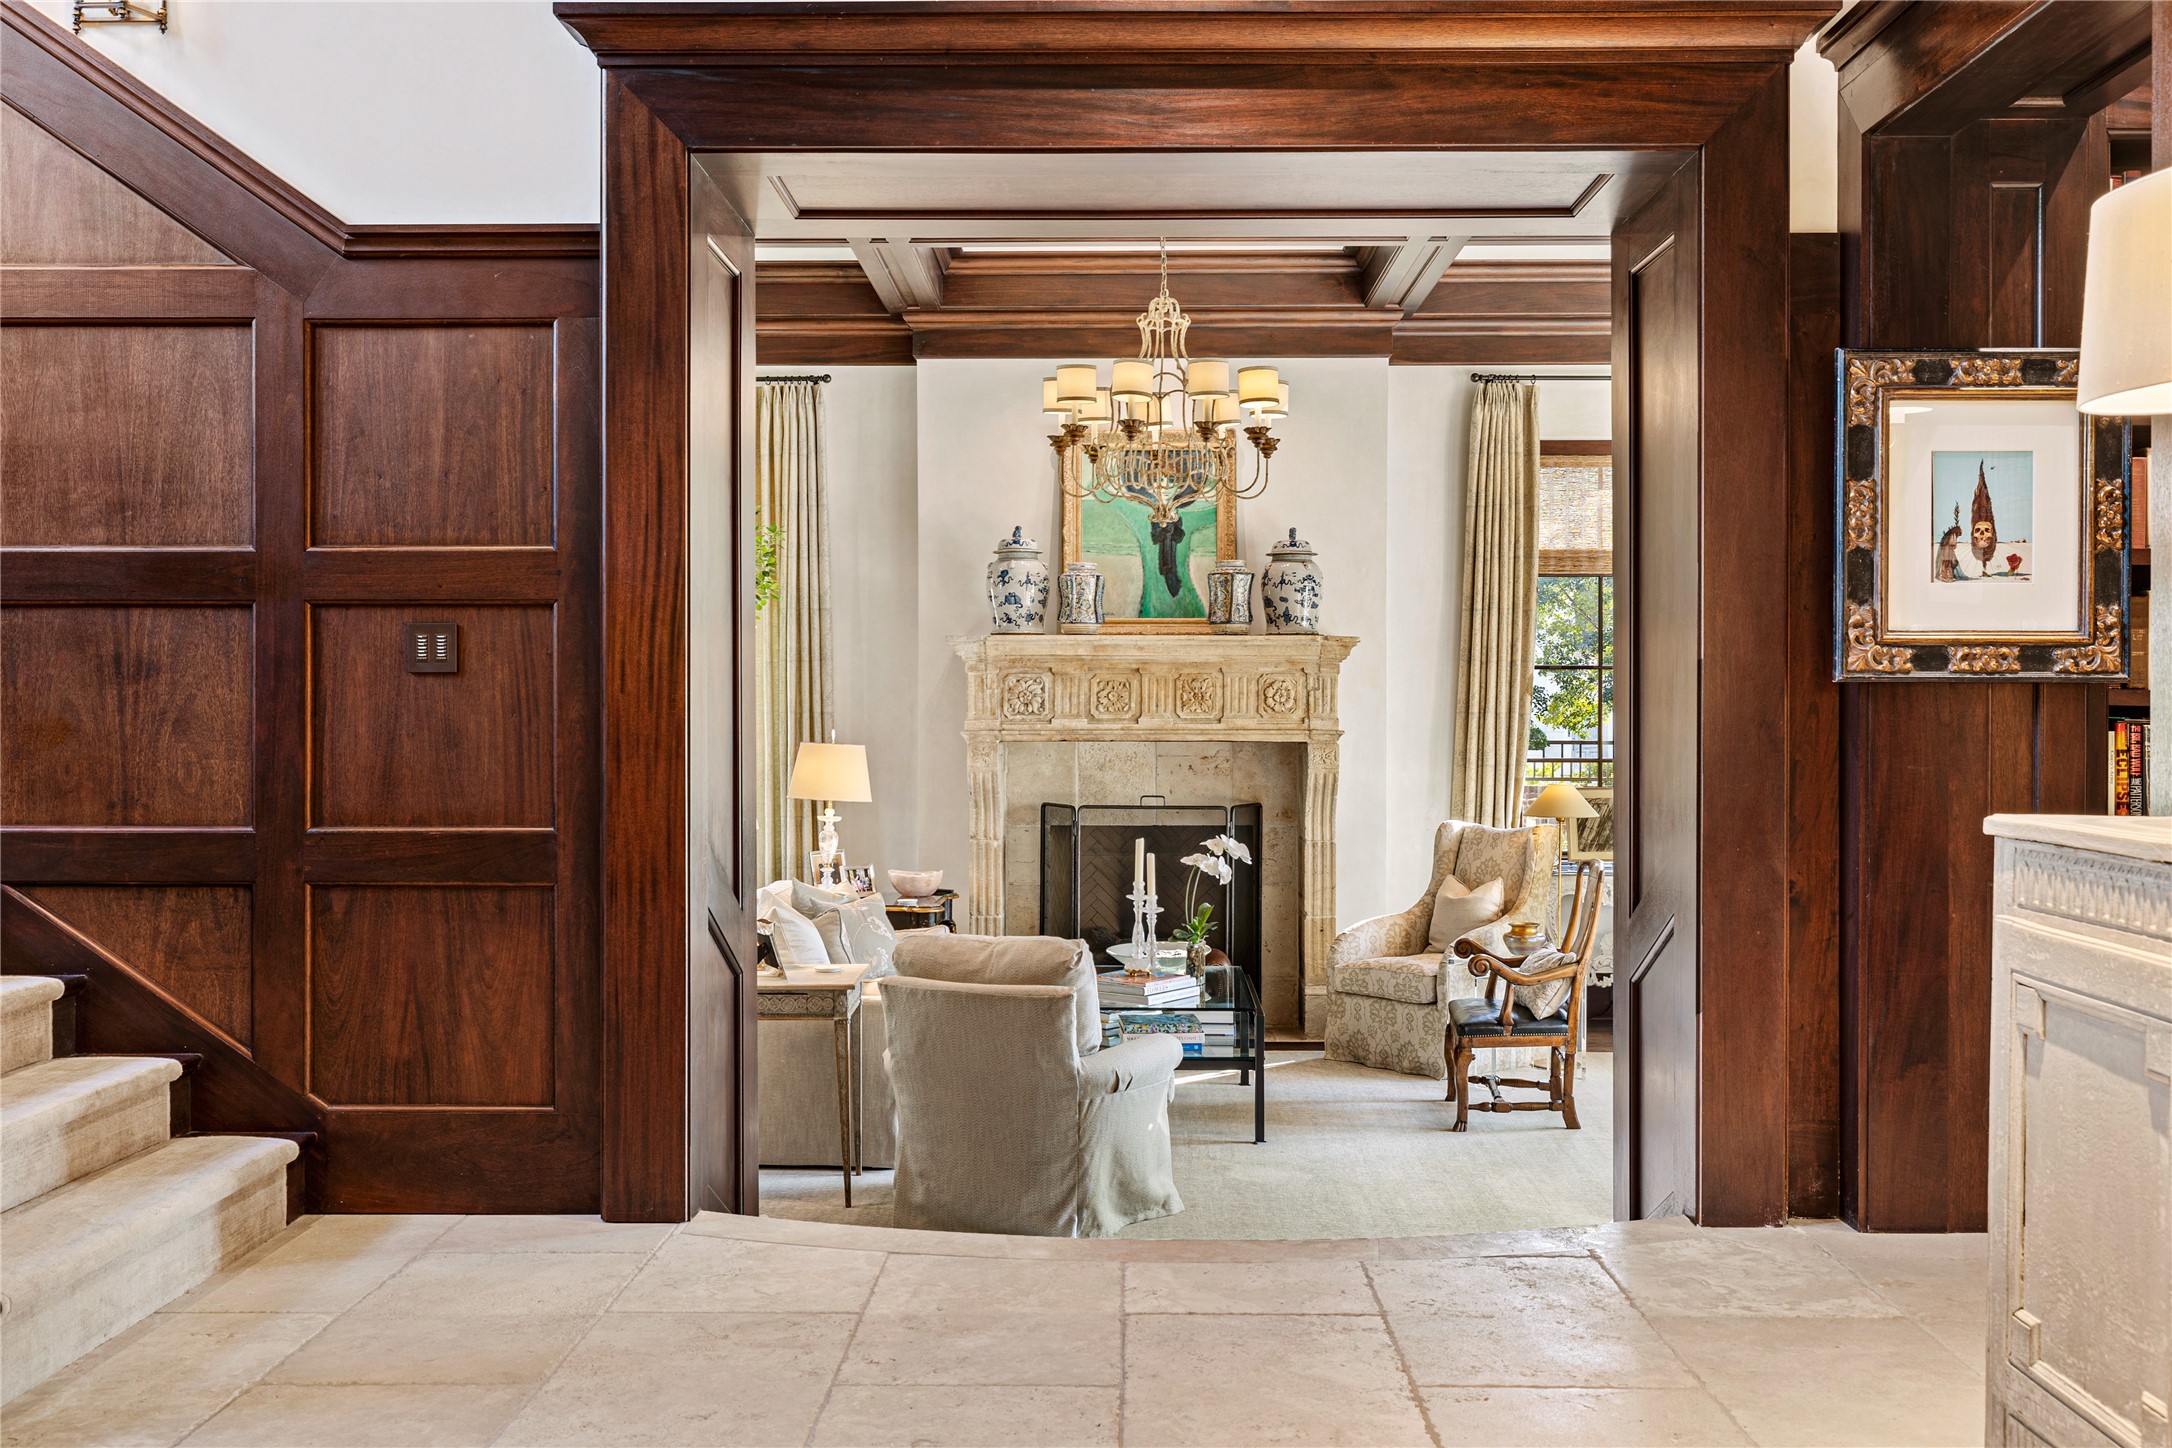 The regal limestone foyer invites you to gather inthe formal living room, flanked by a stone fireplace imported from Italy.